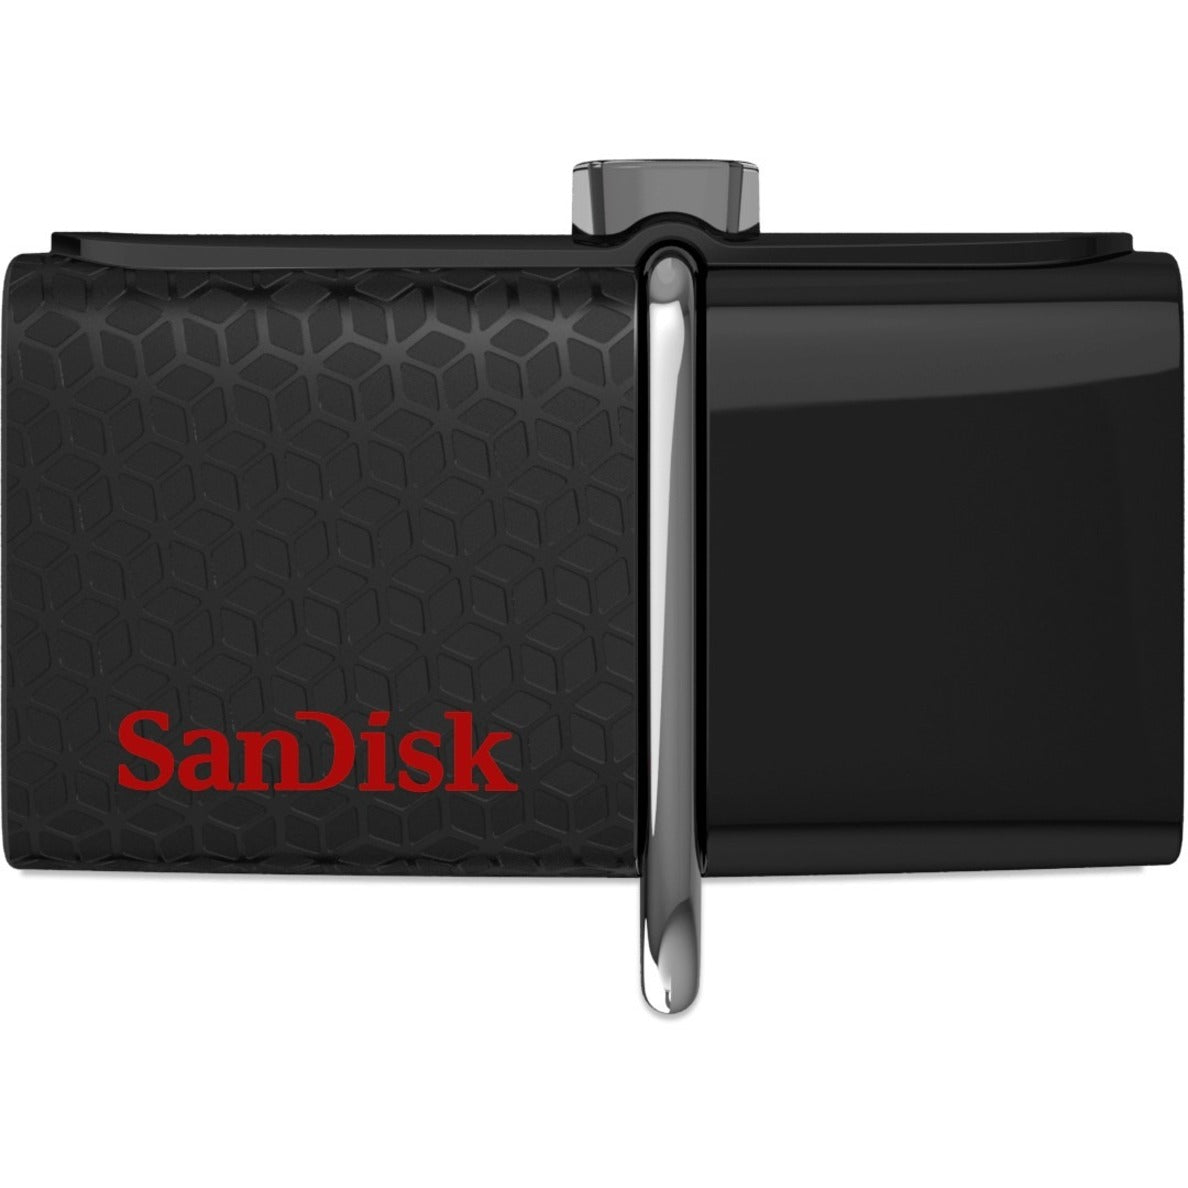 SanDisk SDDD2-032G-A46 Ultra Dual USB Drive 3.0 - 32GB, High-Speed Data Transfer and Easy File Sharing